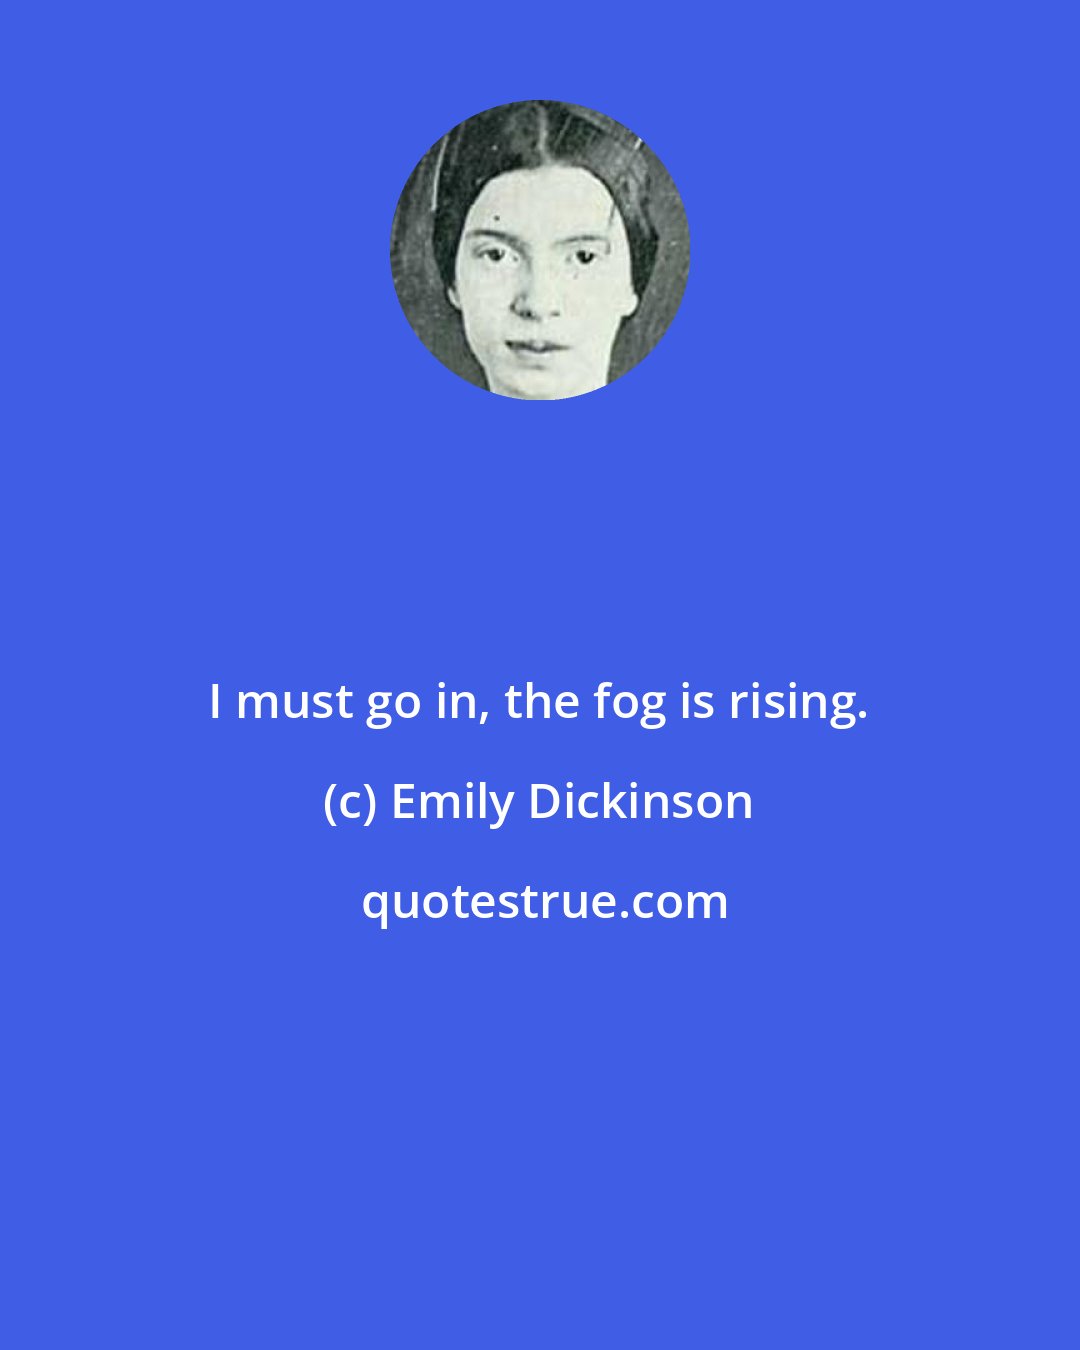 Emily Dickinson: I must go in, the fog is rising.